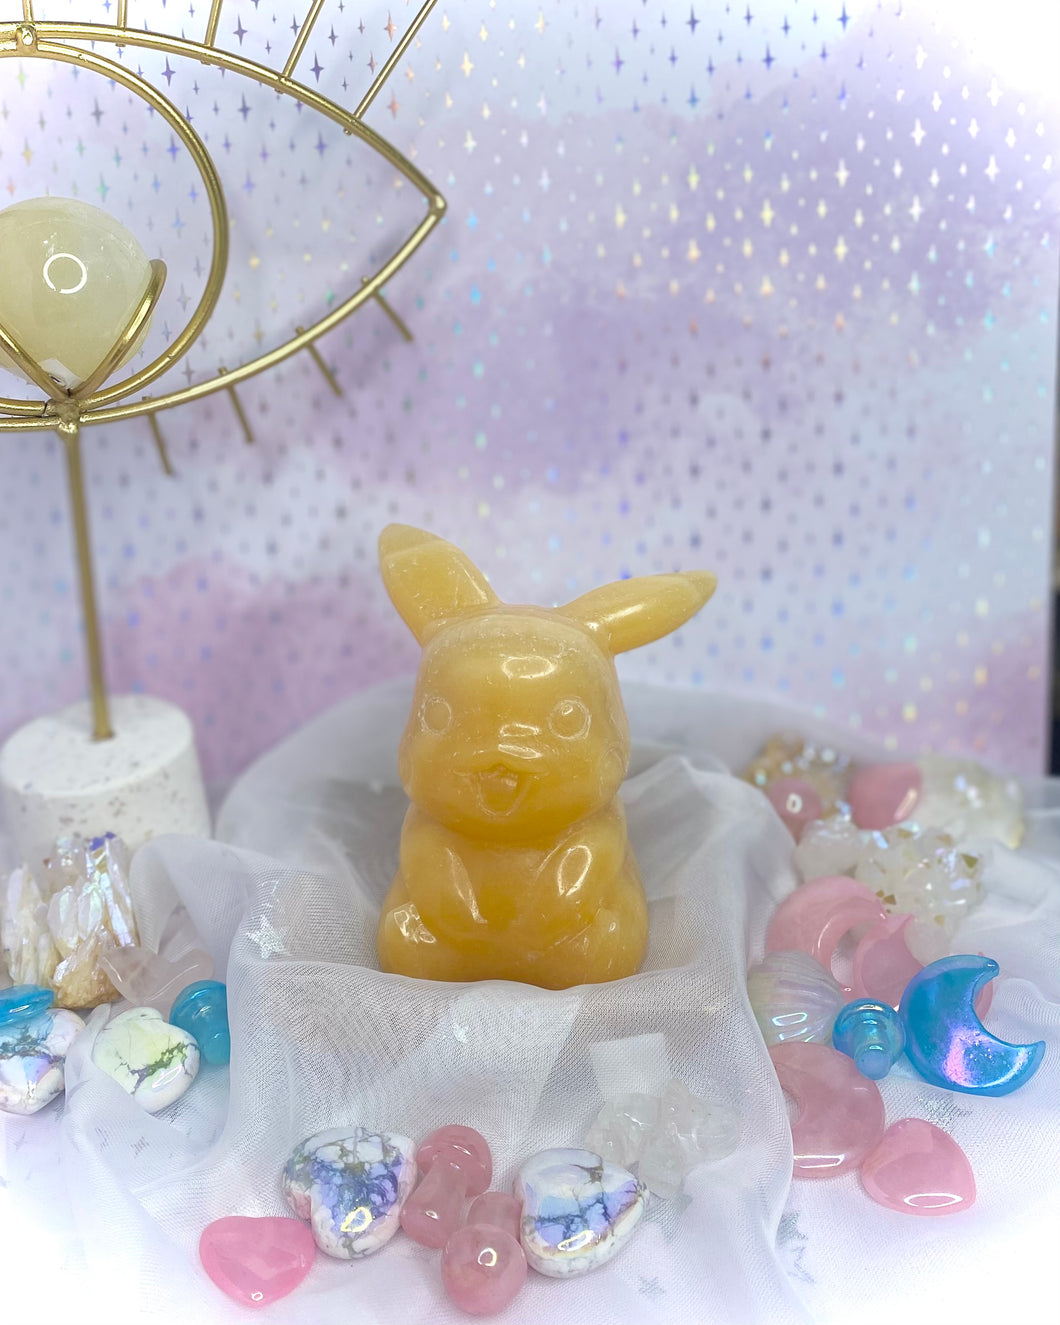 Large Pika Yellow Calcite Crystal Carving